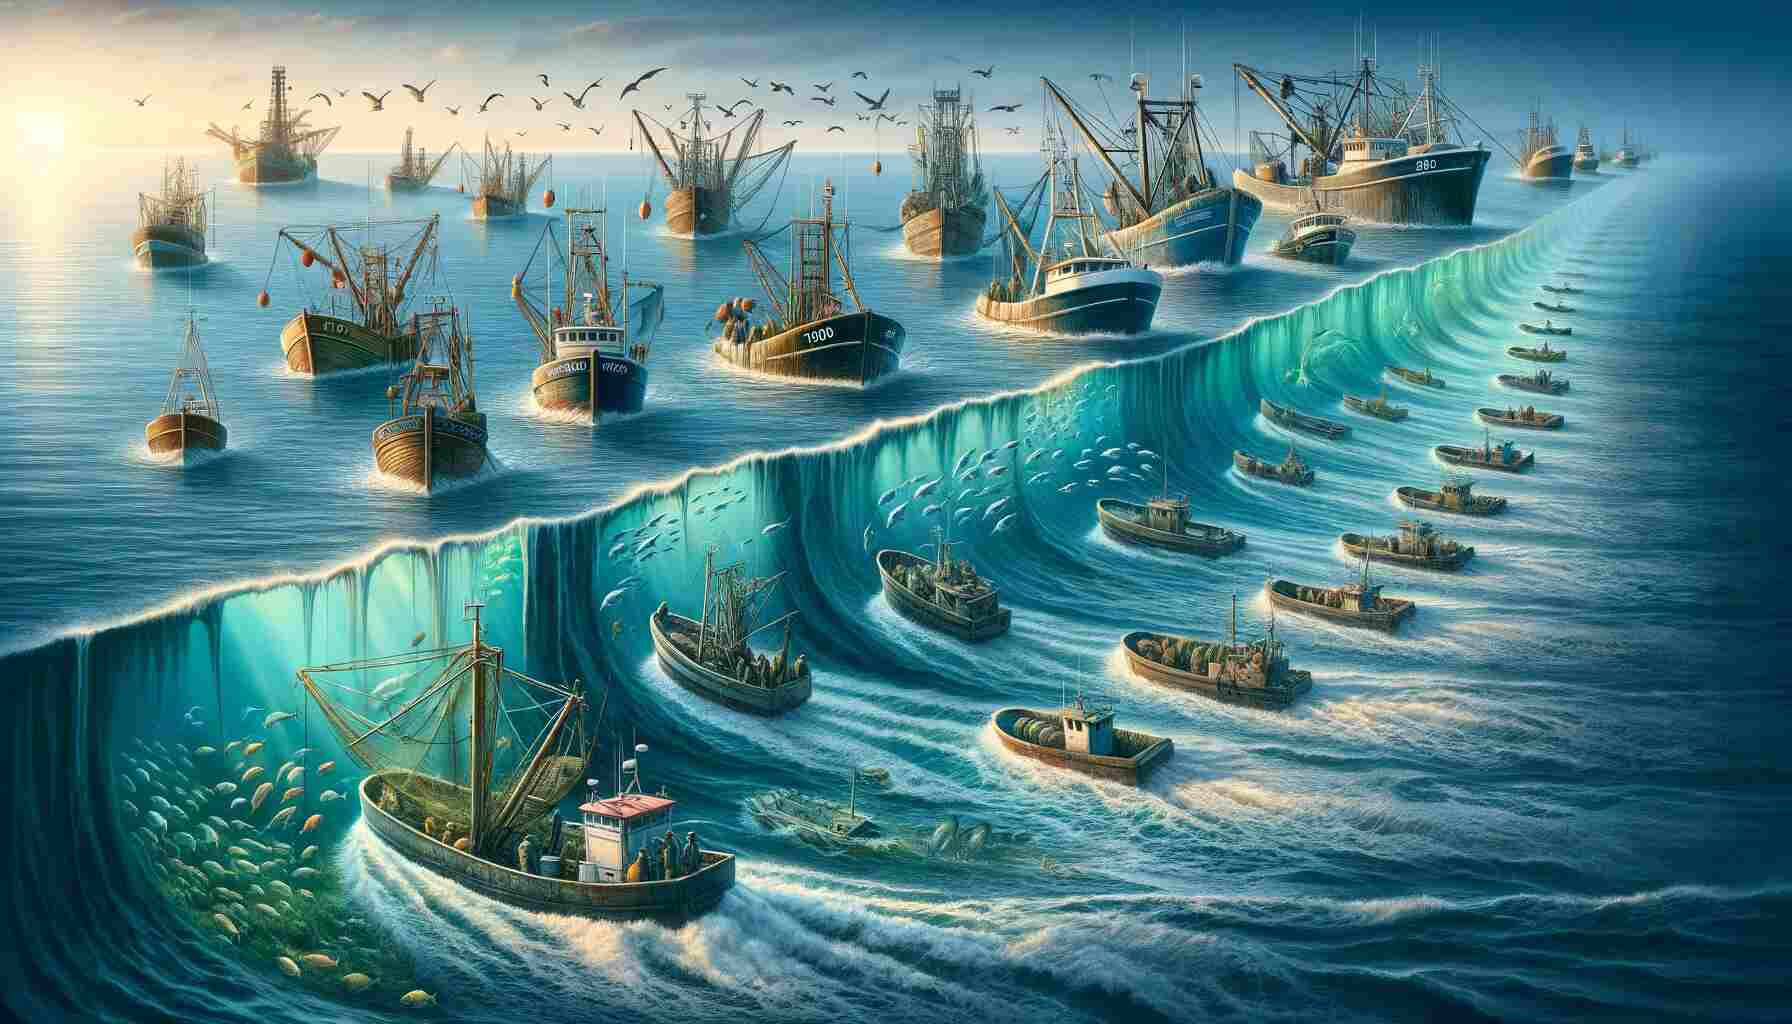 Here is the featured image representing the transformative journey of global fishing from 1950 to 2017. The image vividly captures the evolution of fishing vessels over time and the impact on marine life and ecosystems.